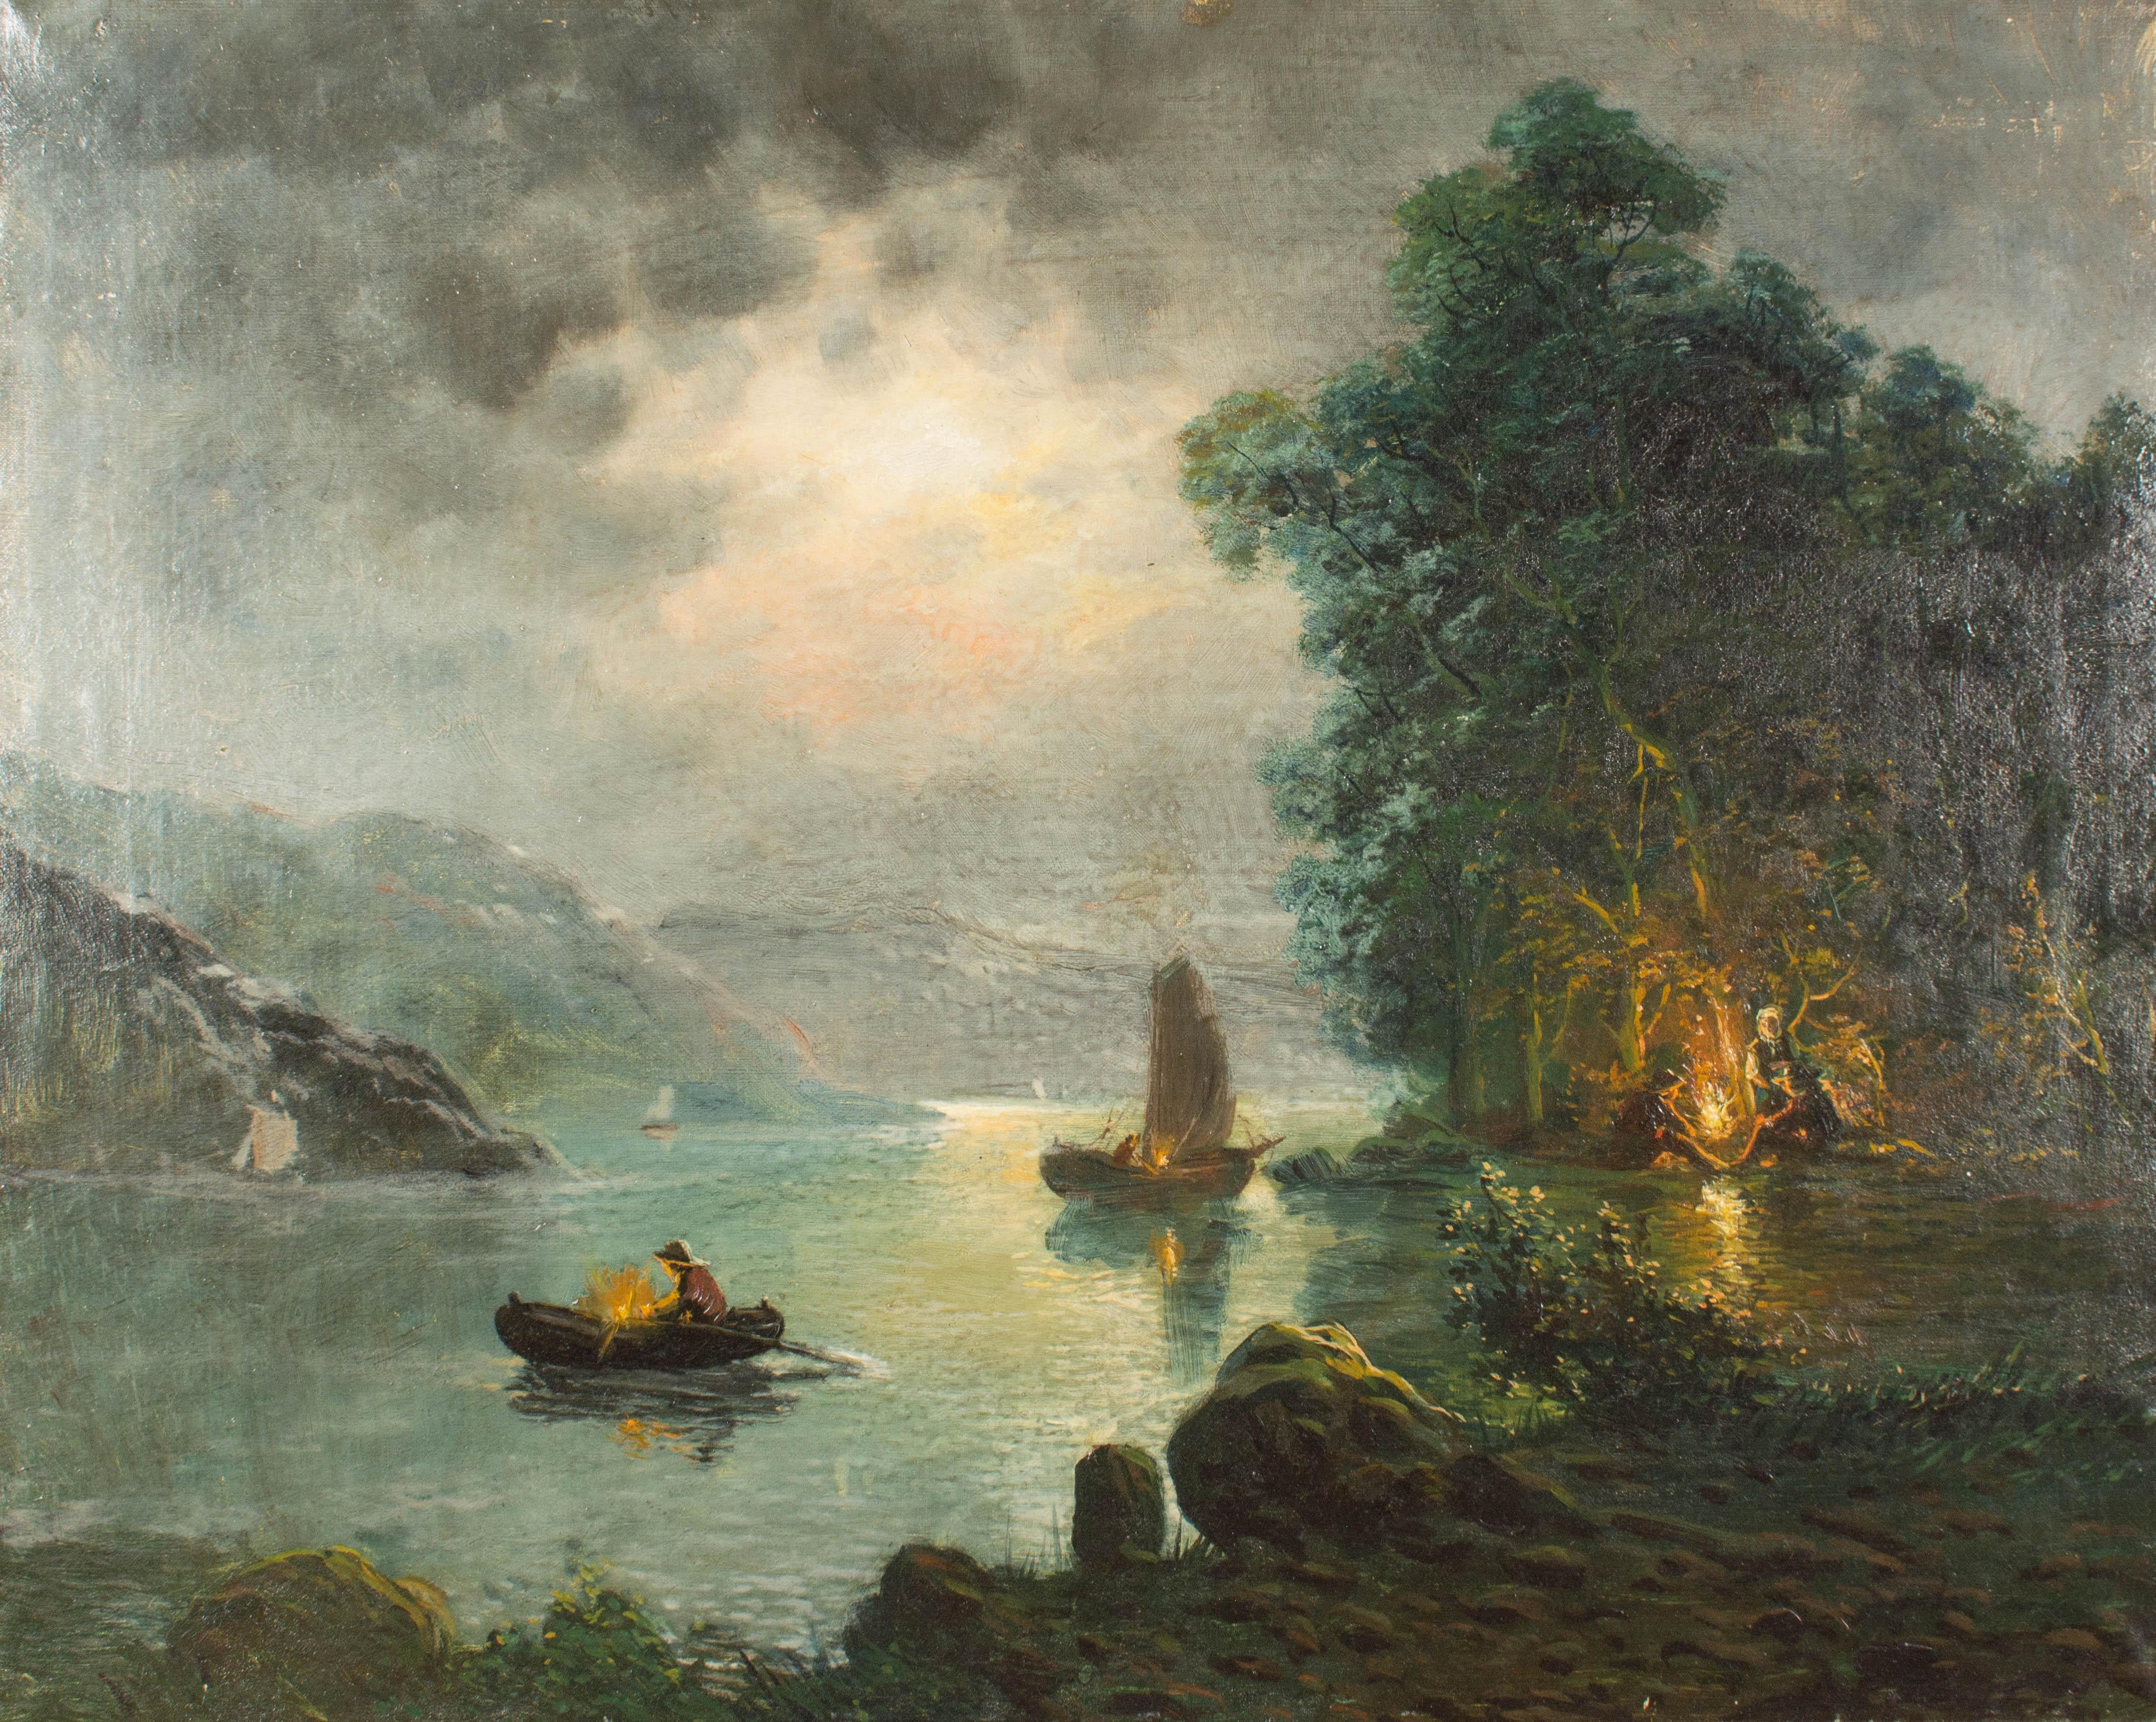 A large scale 19th century Hudson River School landscape painting depicting people fishing on a moonlit lake. Unsigned. Original giltwood and gesso frame is in good condition with minor repair and touch-ups to gilt. Artist unknown, but similar in